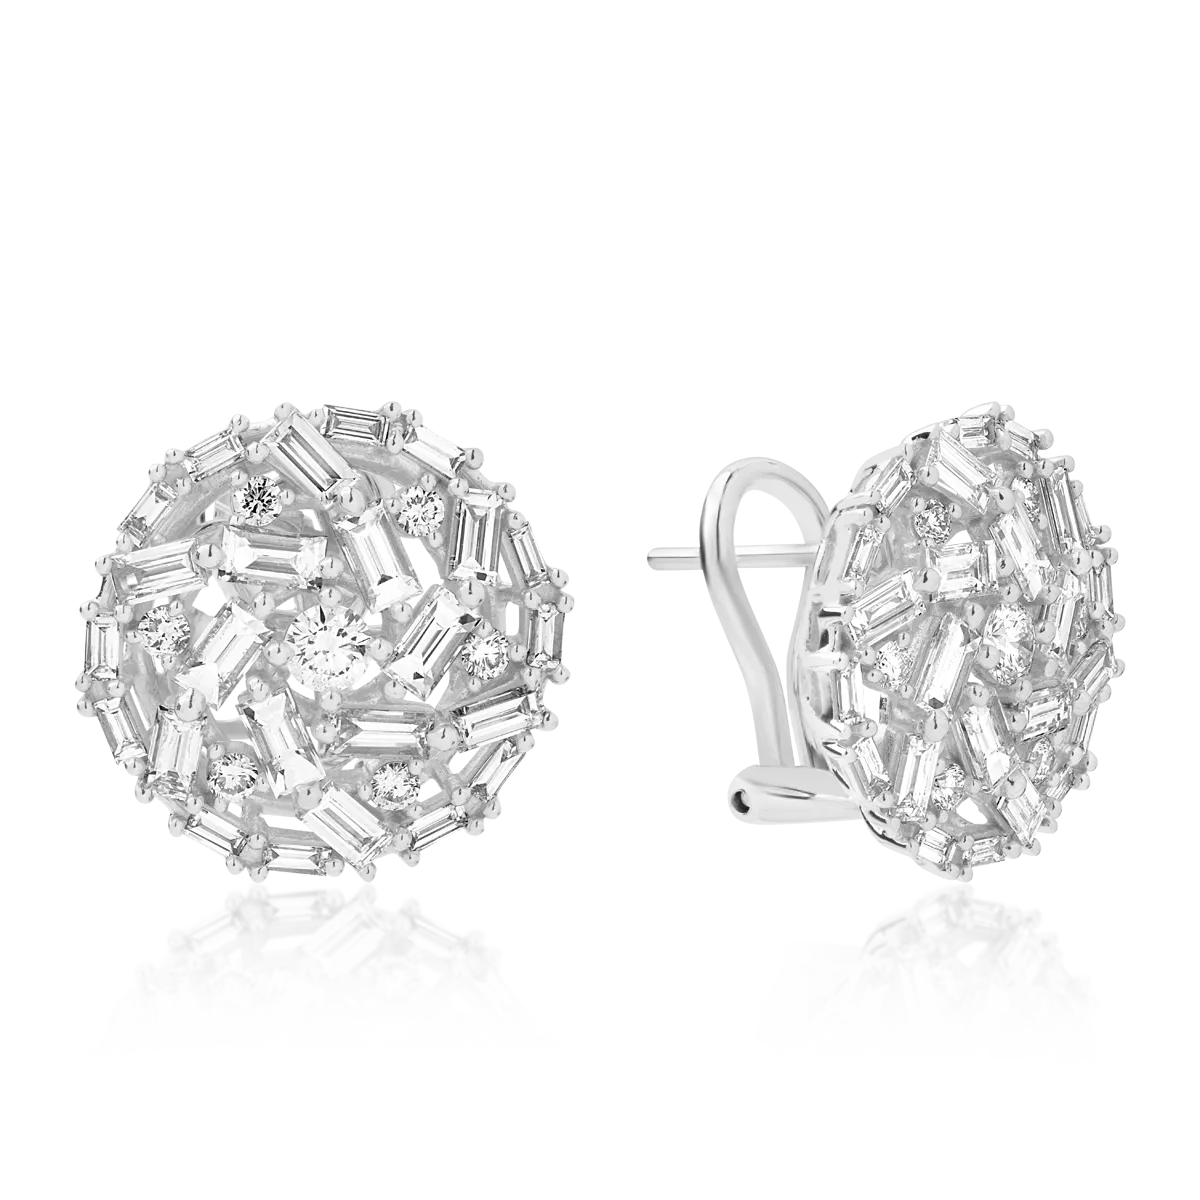 18K white gold earrings with 1.42ct diamonds